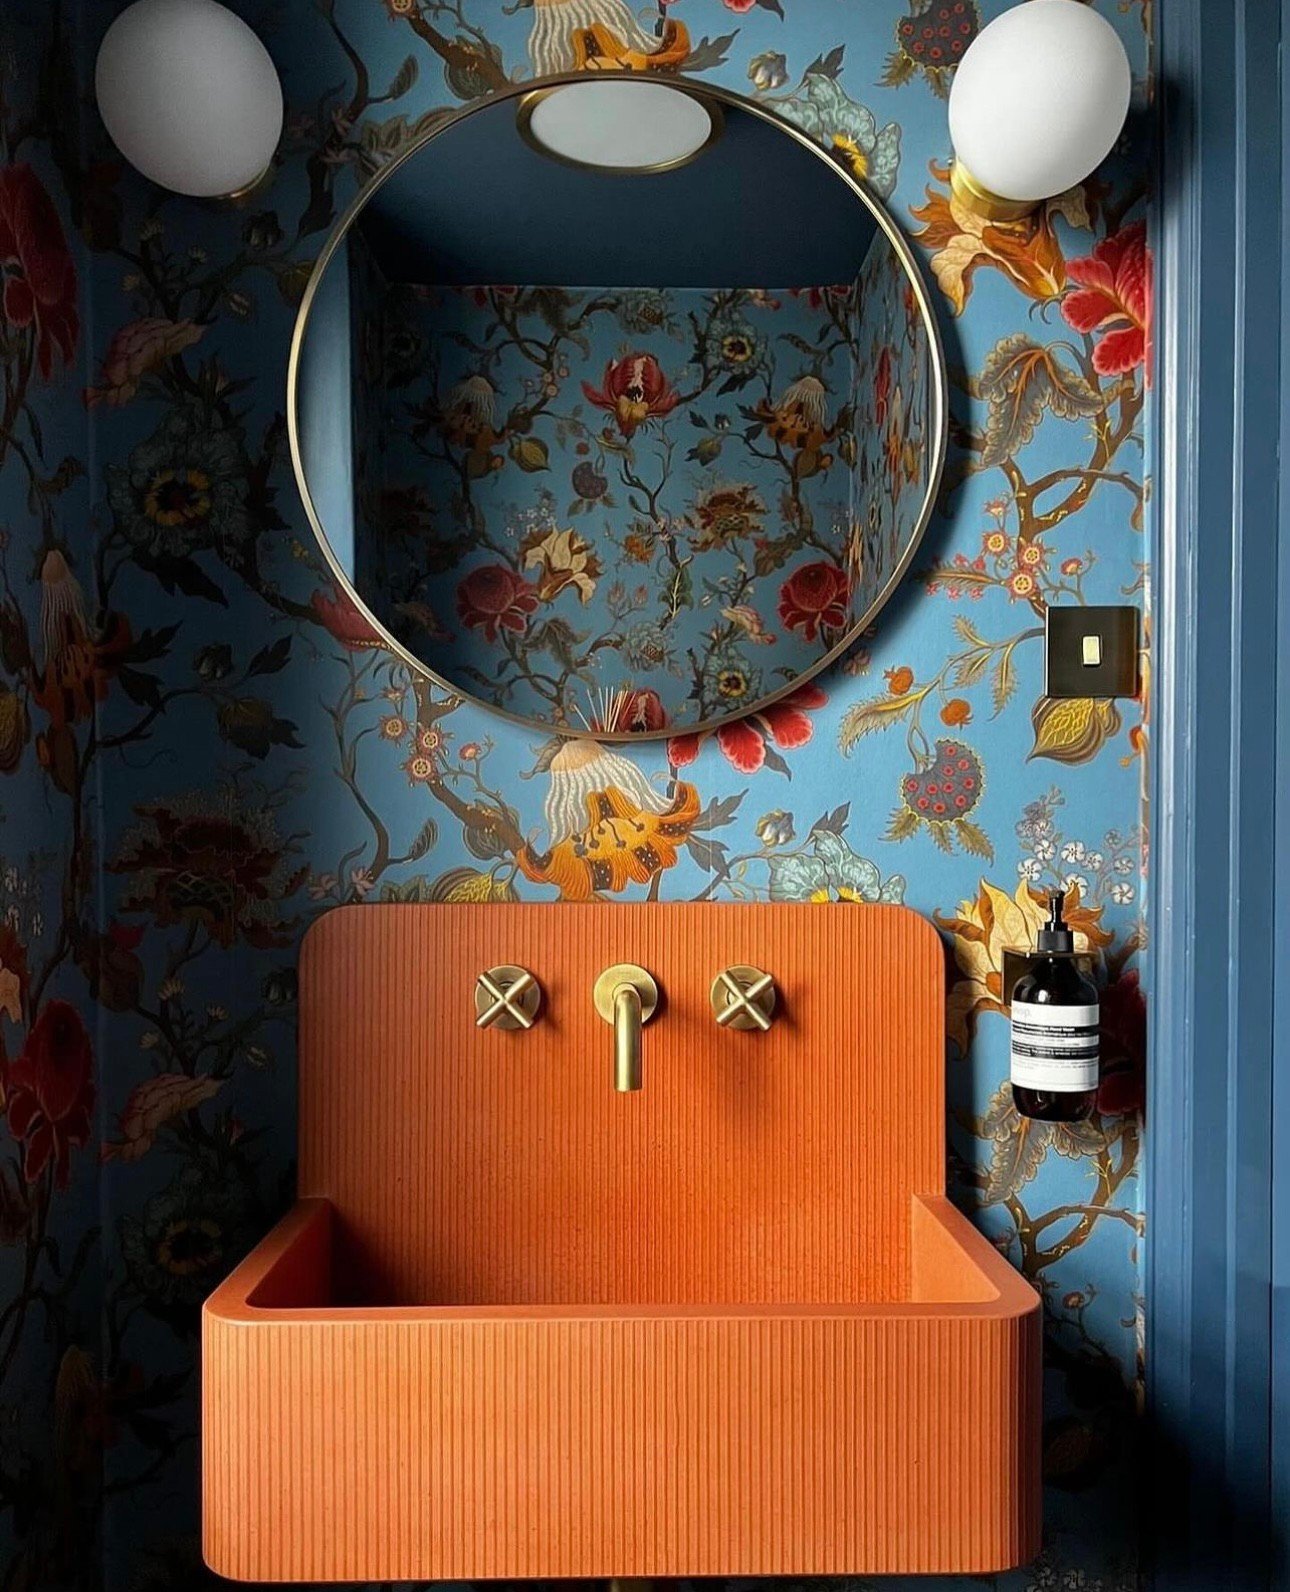 A study in orange...because I am feeling the need for a little bright and happy today. Amazing how an inspired design can change how we experience colors on a deeper, more emotional level. While a vibrant sink may not be everyone's first choice, it s